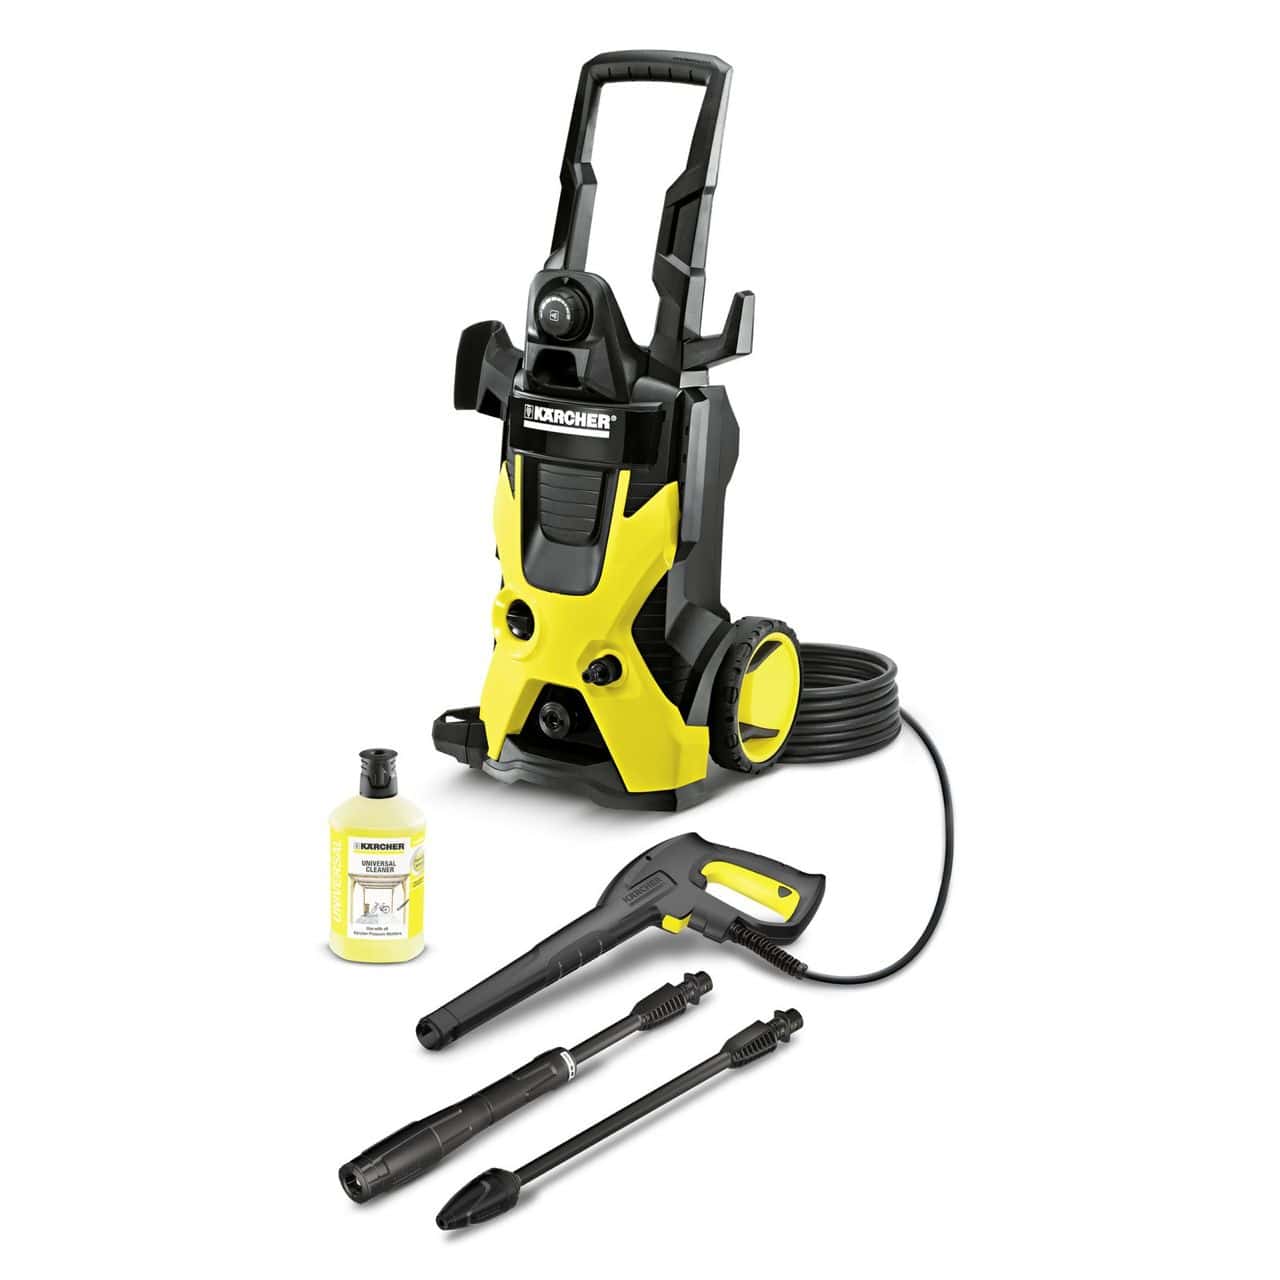 Karcher K5 Premium Electric Pressure Washer 2000 PSI | Supply Master | Accra, Ghana Pressure Washer Buy Tools hardware Building materials